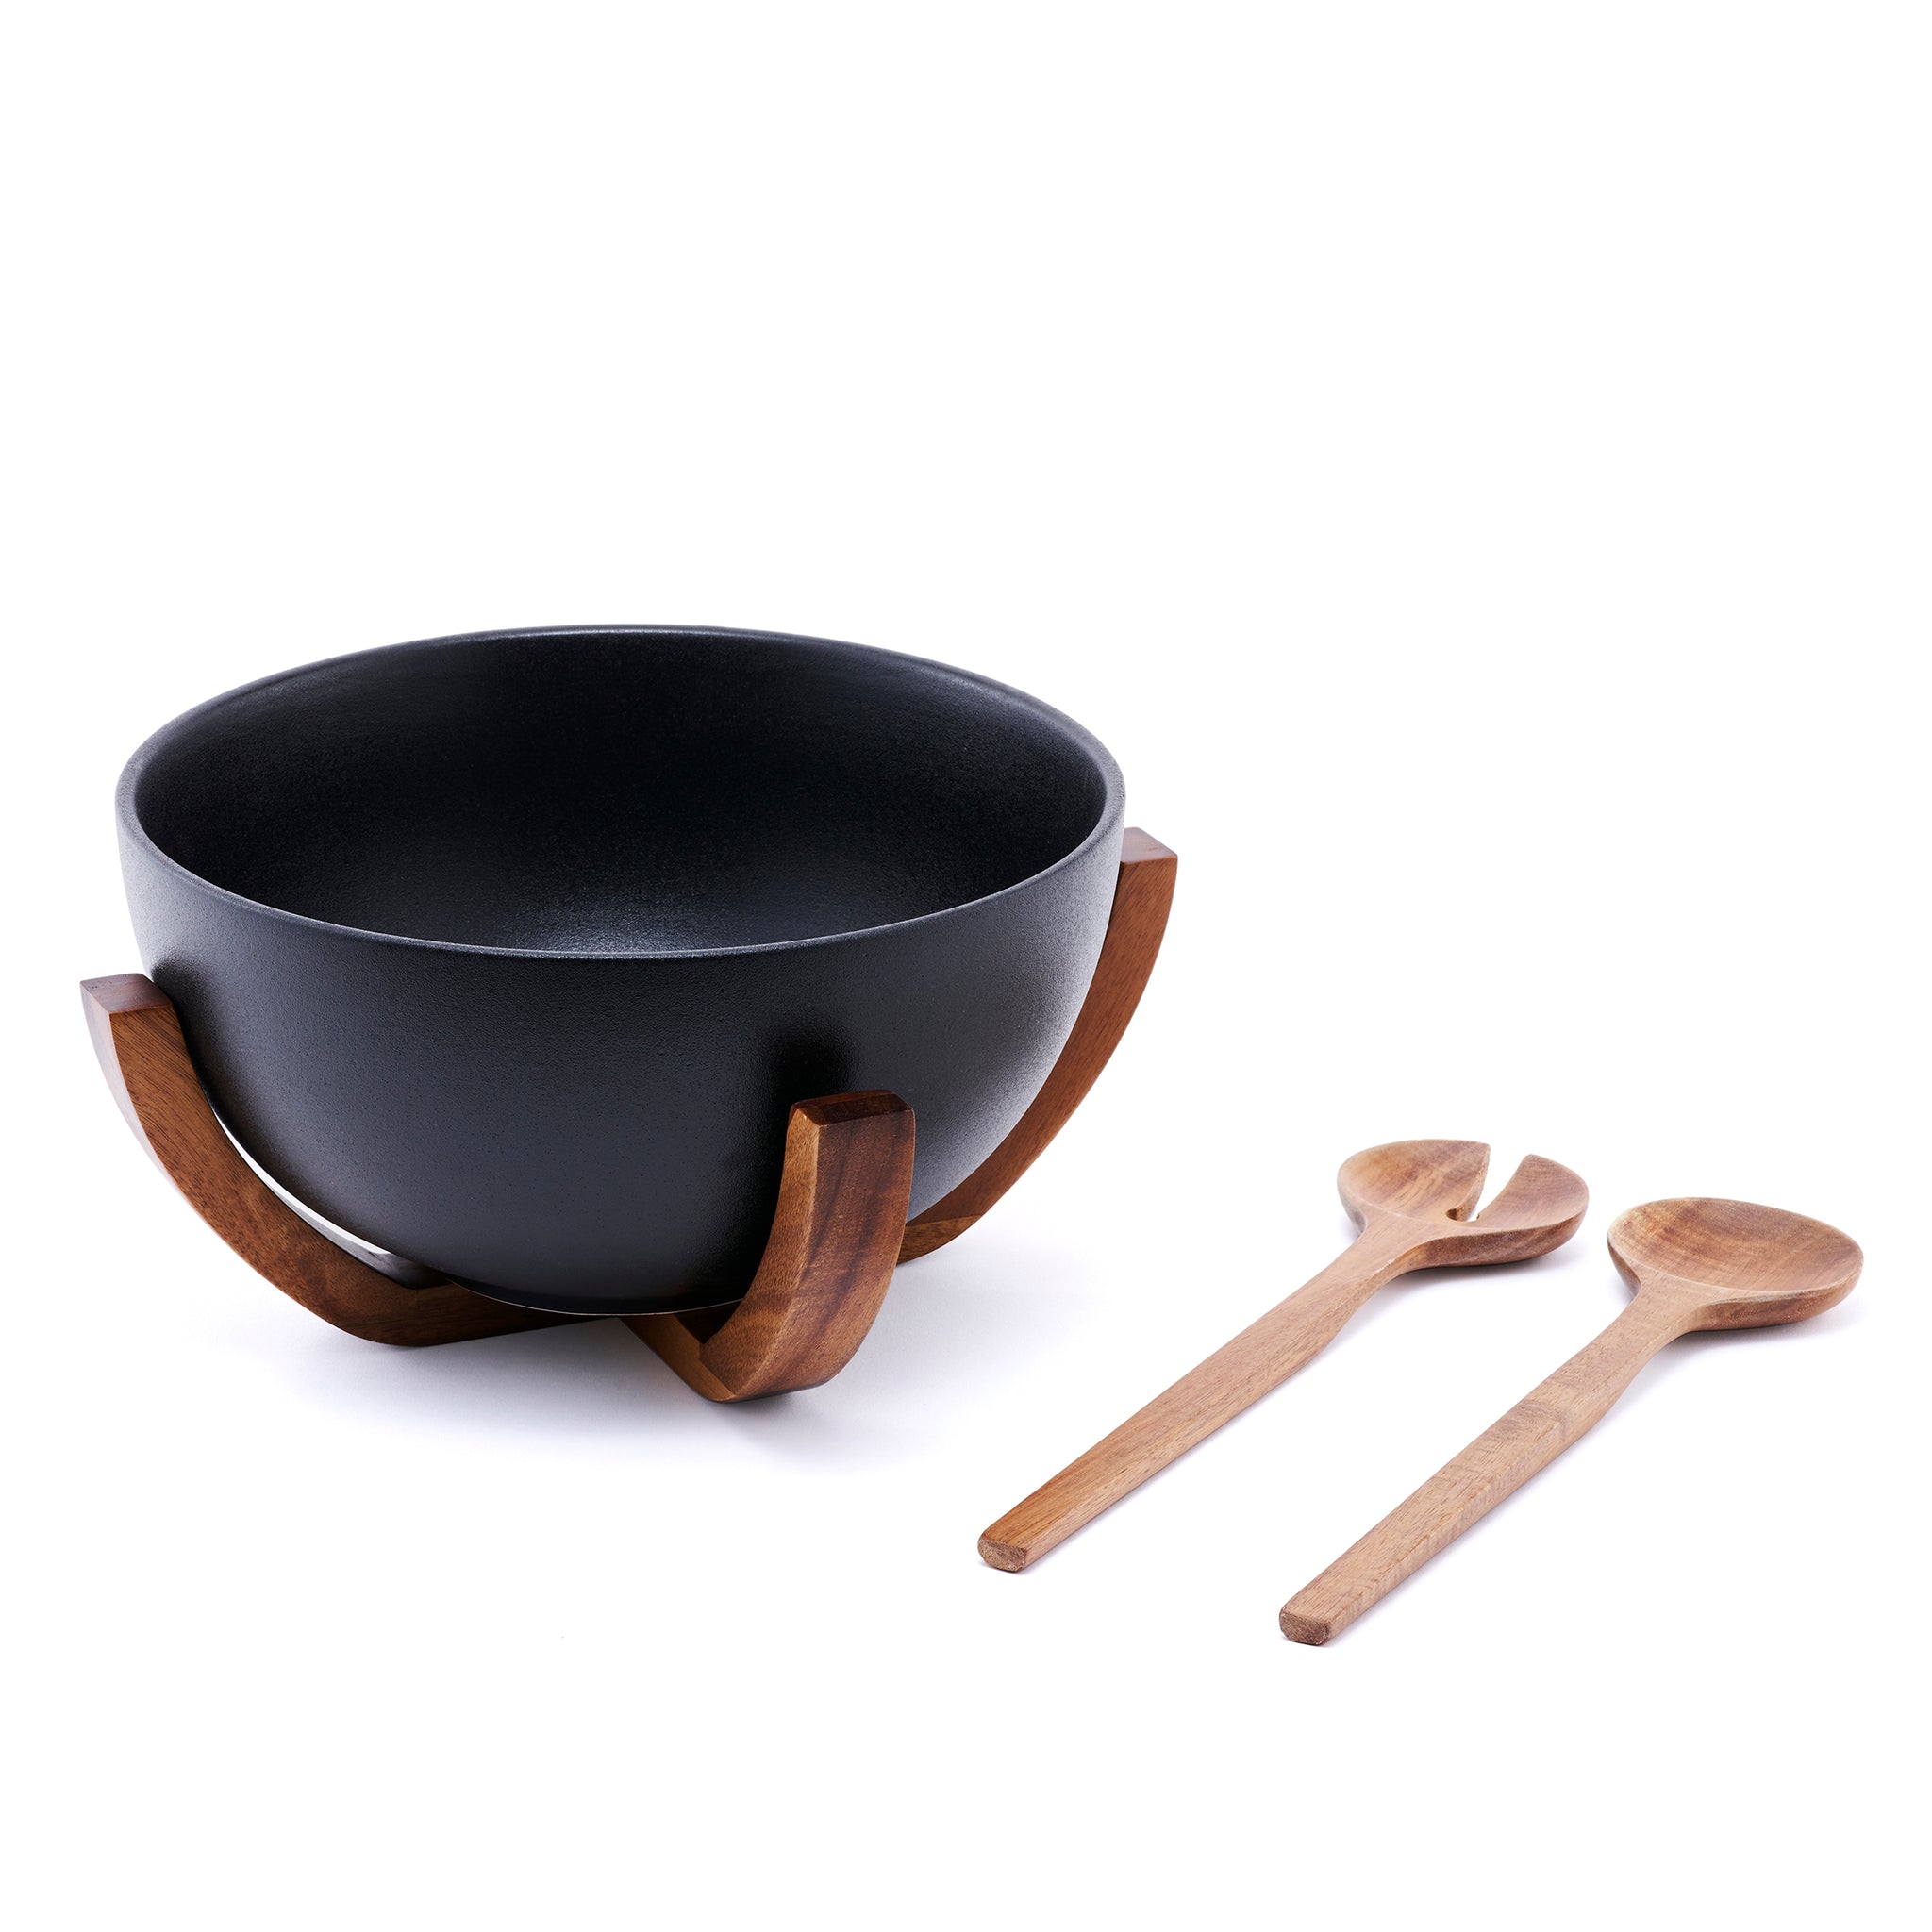 Beaumont Ceramic Collection - Bowl, Stand and Spoons Set